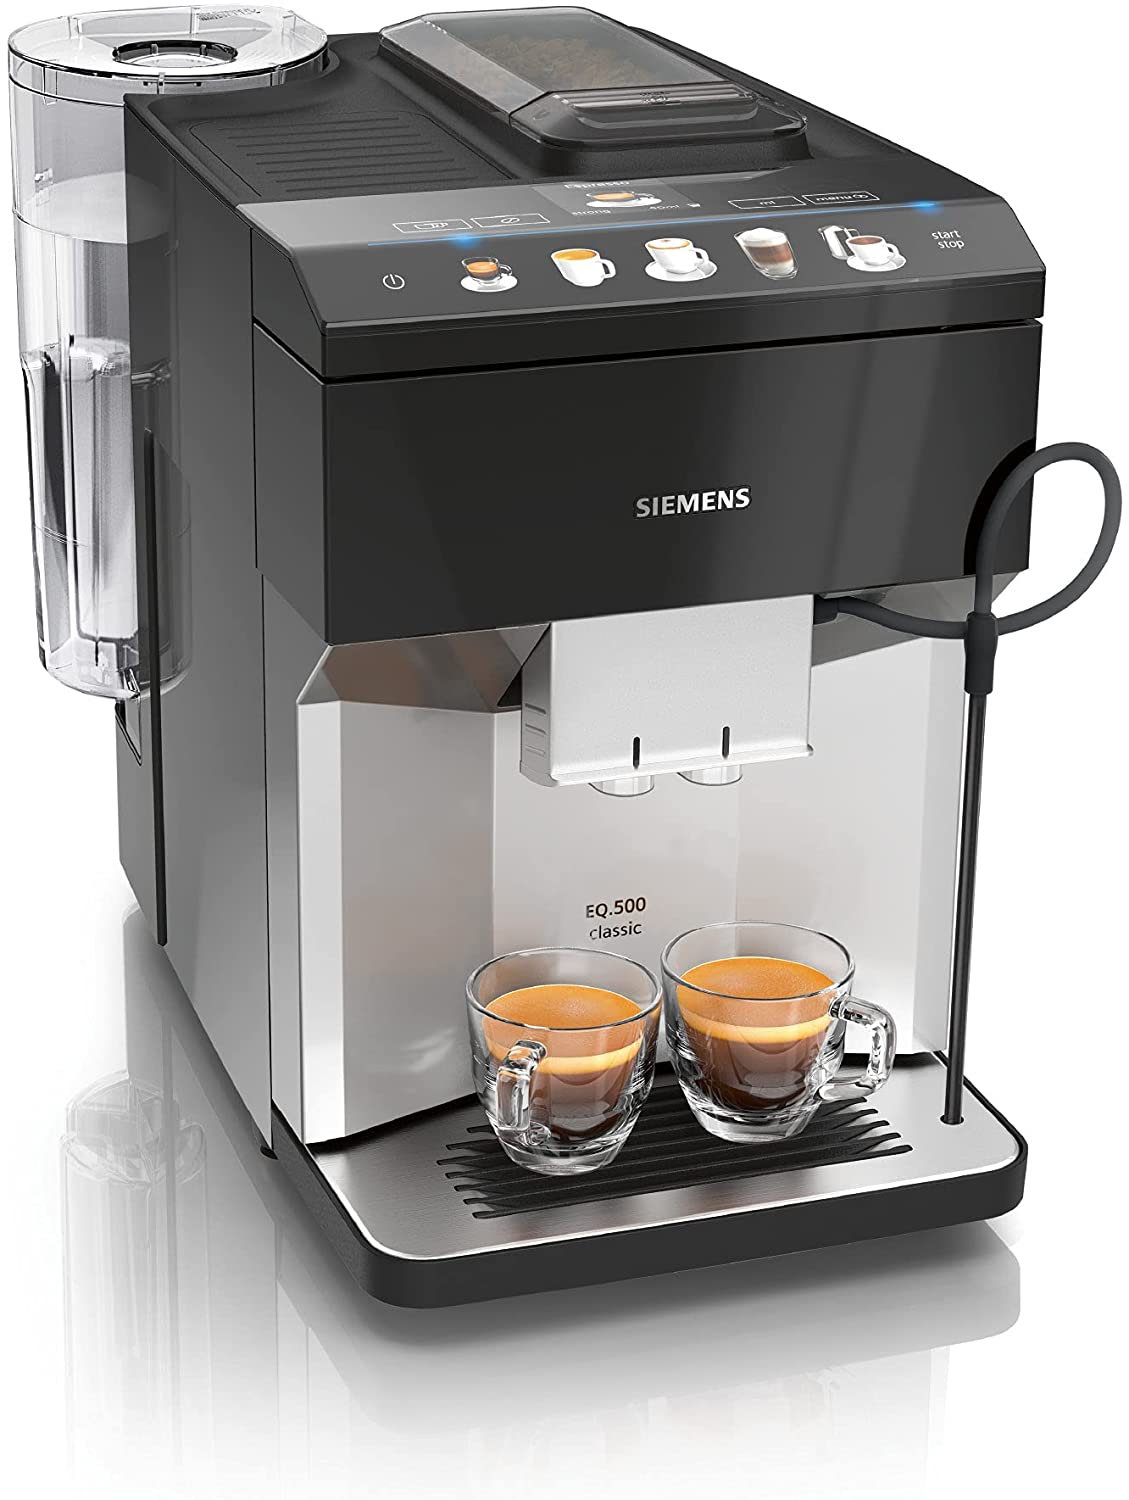 Siemens EQ.500 classic TP505D01 fully automatic coffee machine, for many coffee specialities, milk frother, ceramic grinder, hot water function, automatic steam cleaning, 1500 W, stainless steel metallic silver